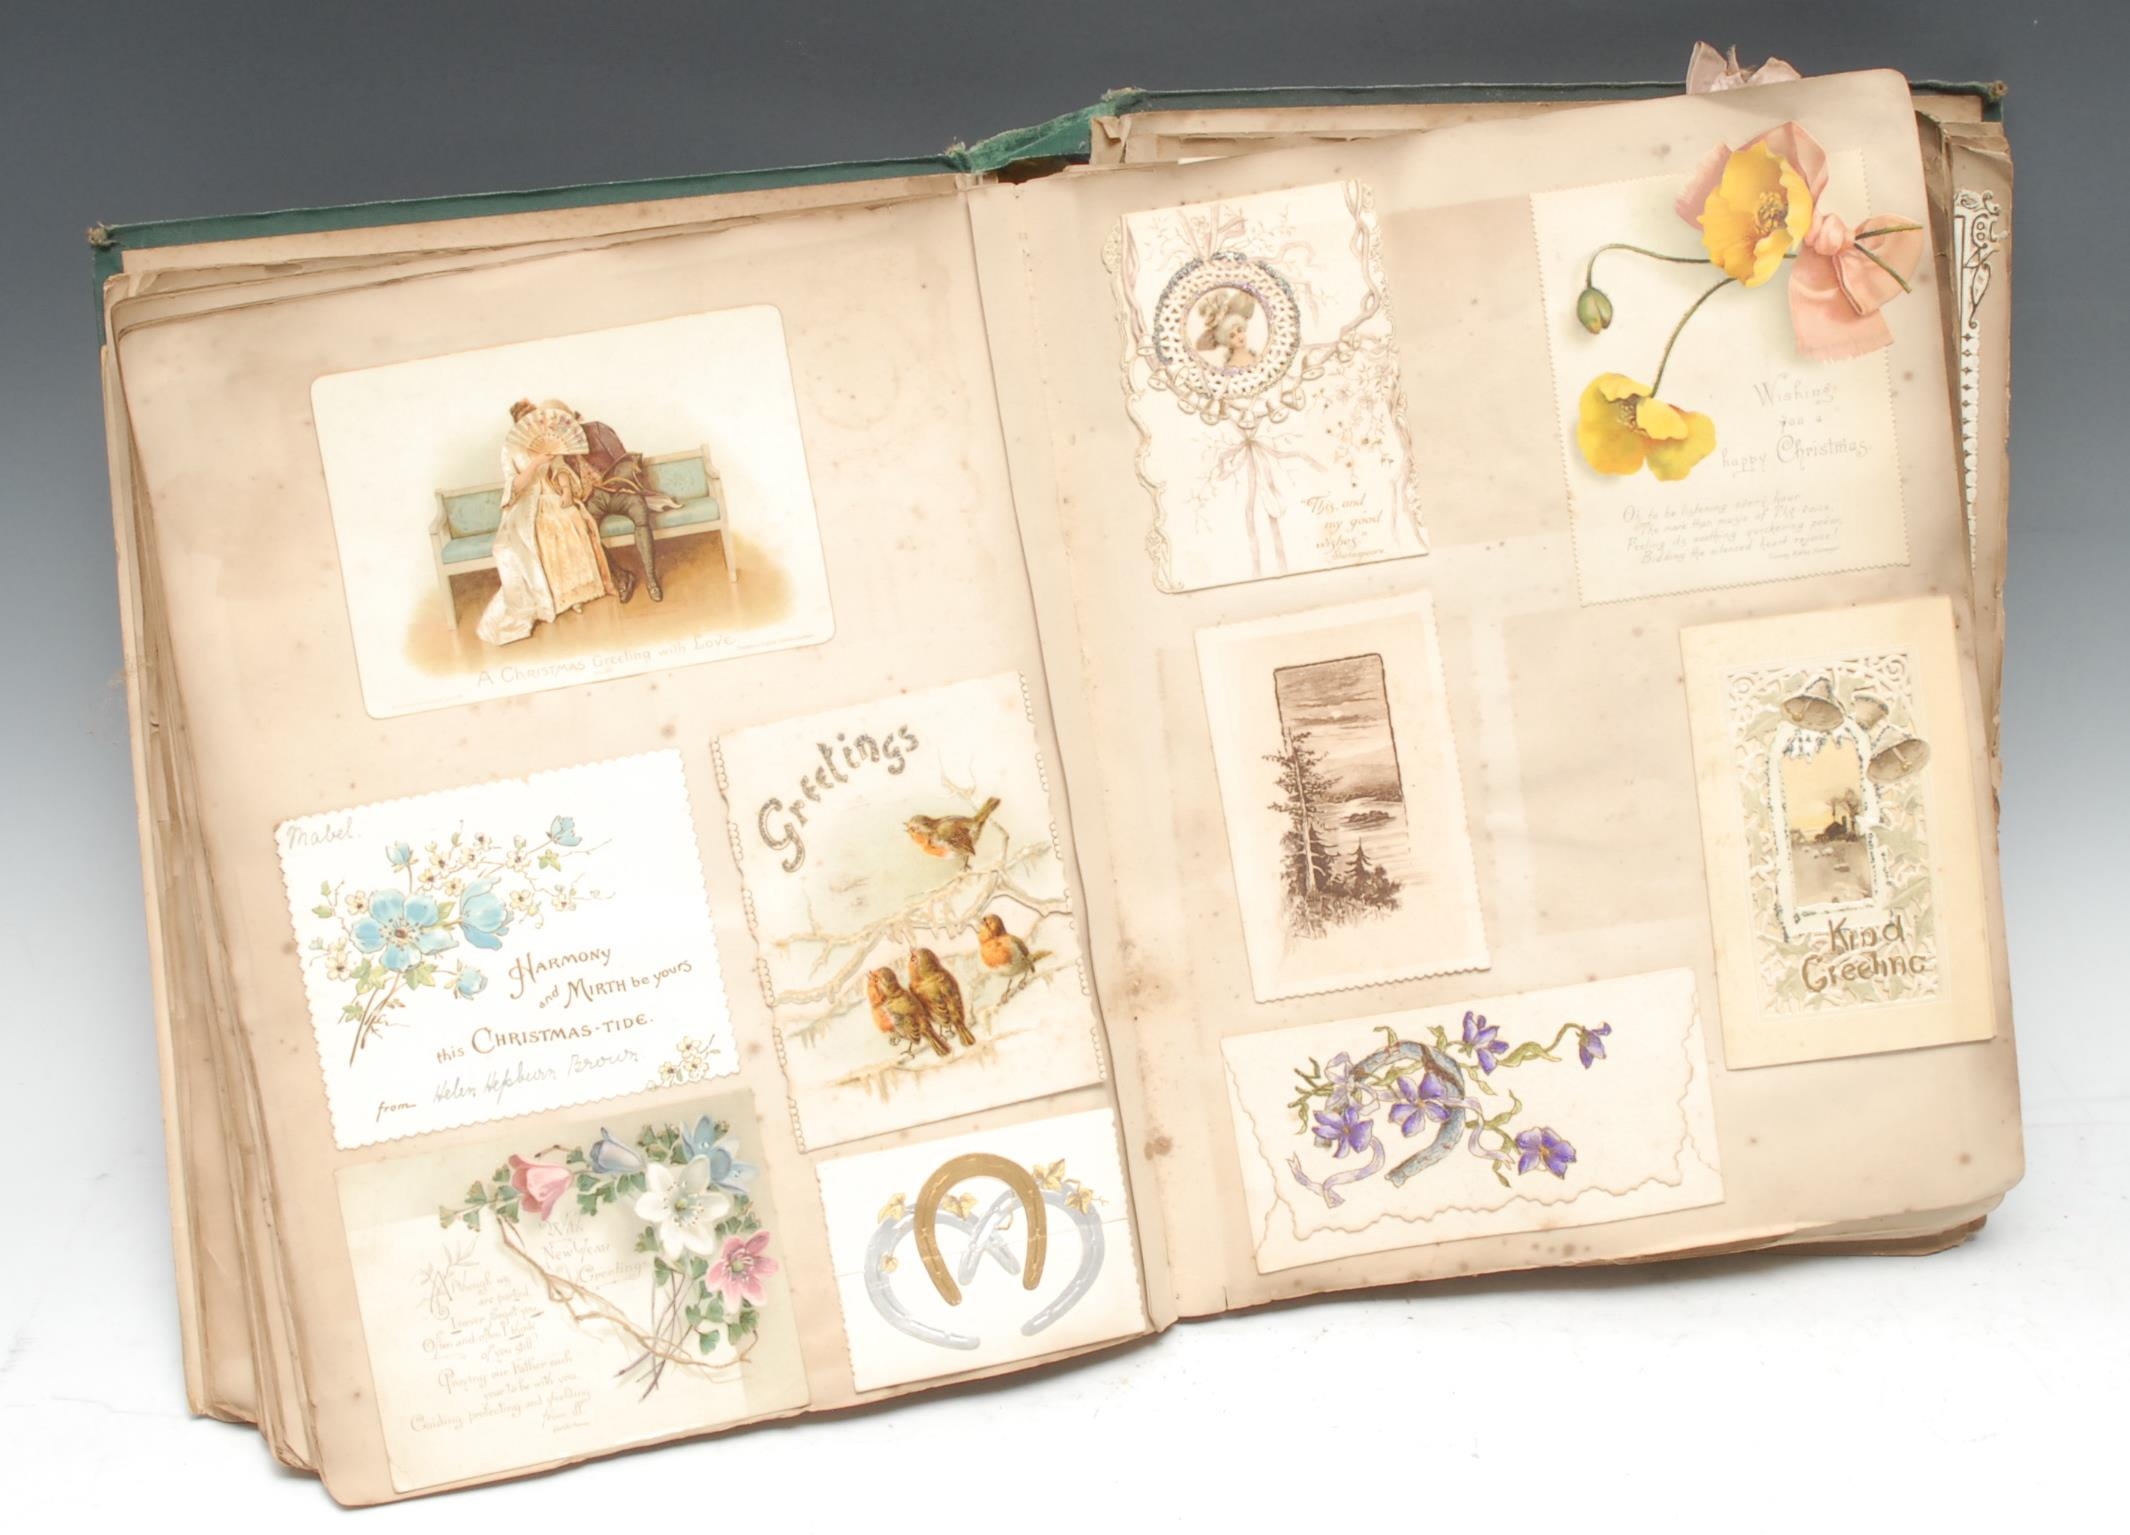 A 19th century scrap album, compiled by Maud H ** c.1887 and passed on to Jack Allsopp c.1901, - Image 3 of 4